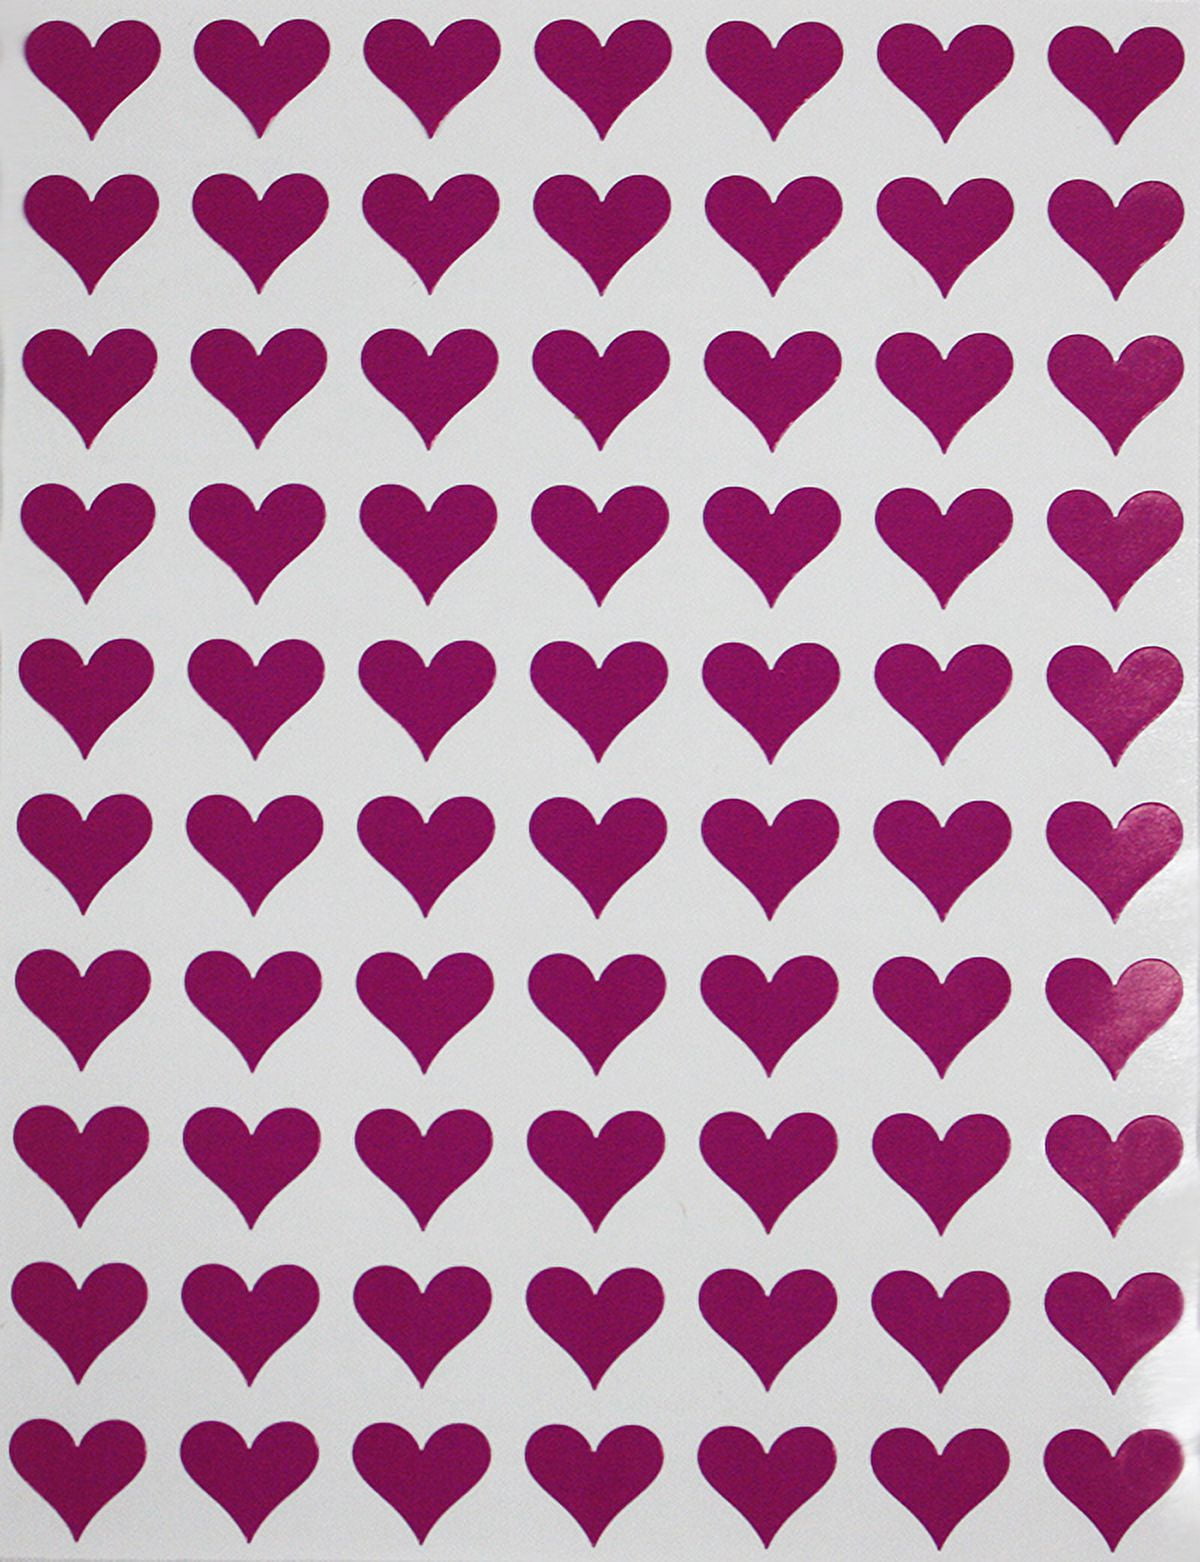 Metallic Rose Heart Stickers | 0.75 Inch Wide | 500 Pack